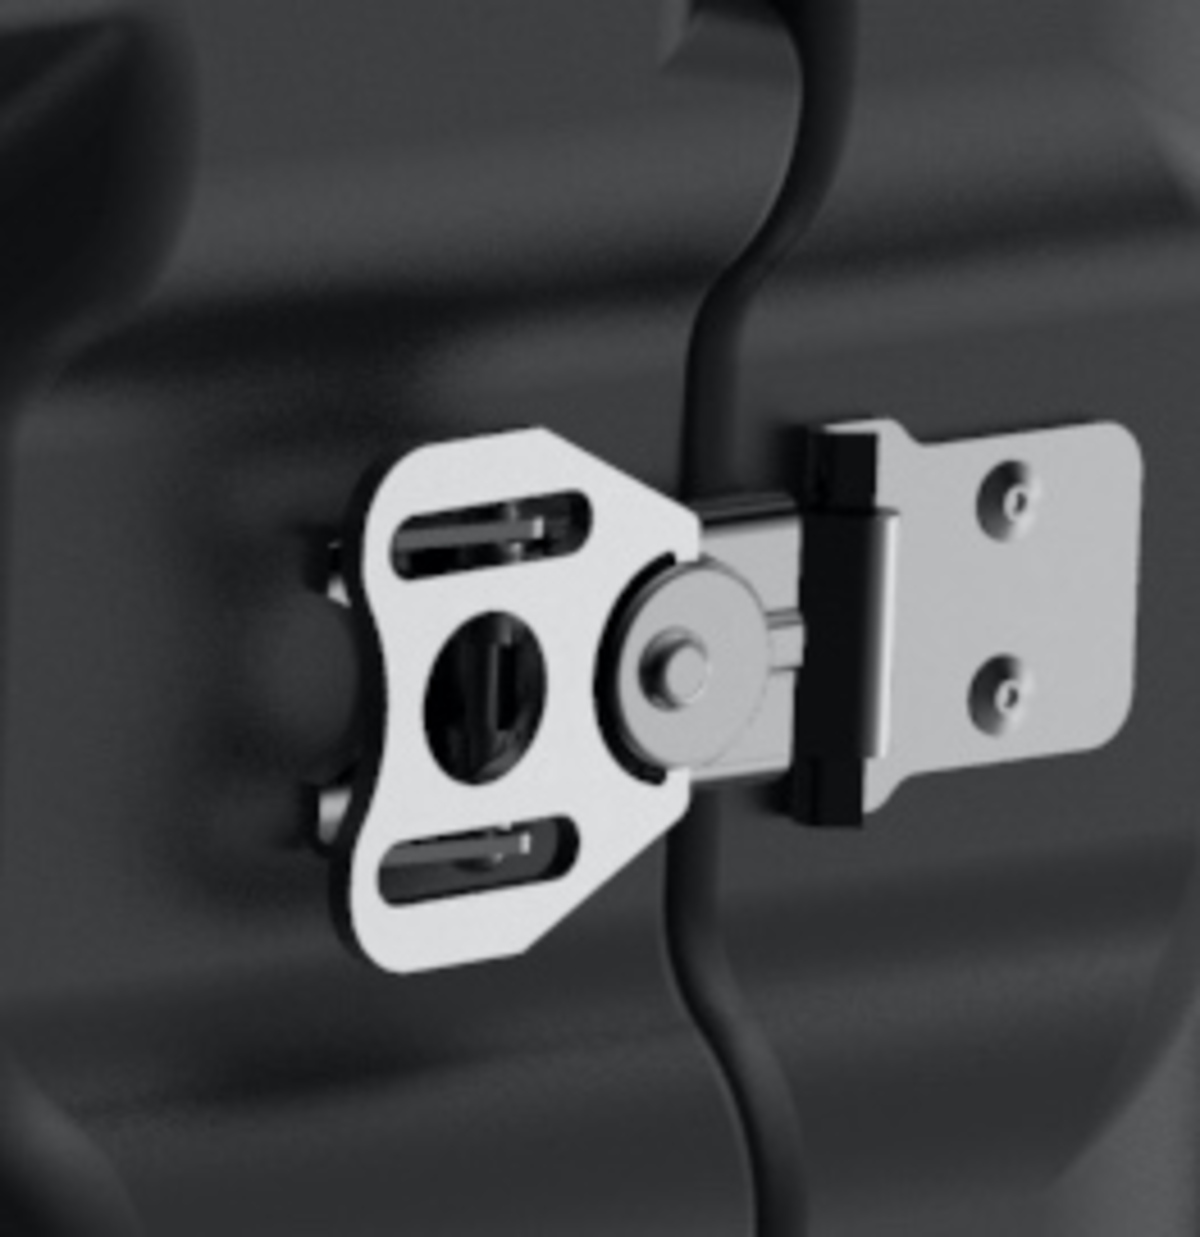 Recessed heavy duty twist latches keep contents secure during transport